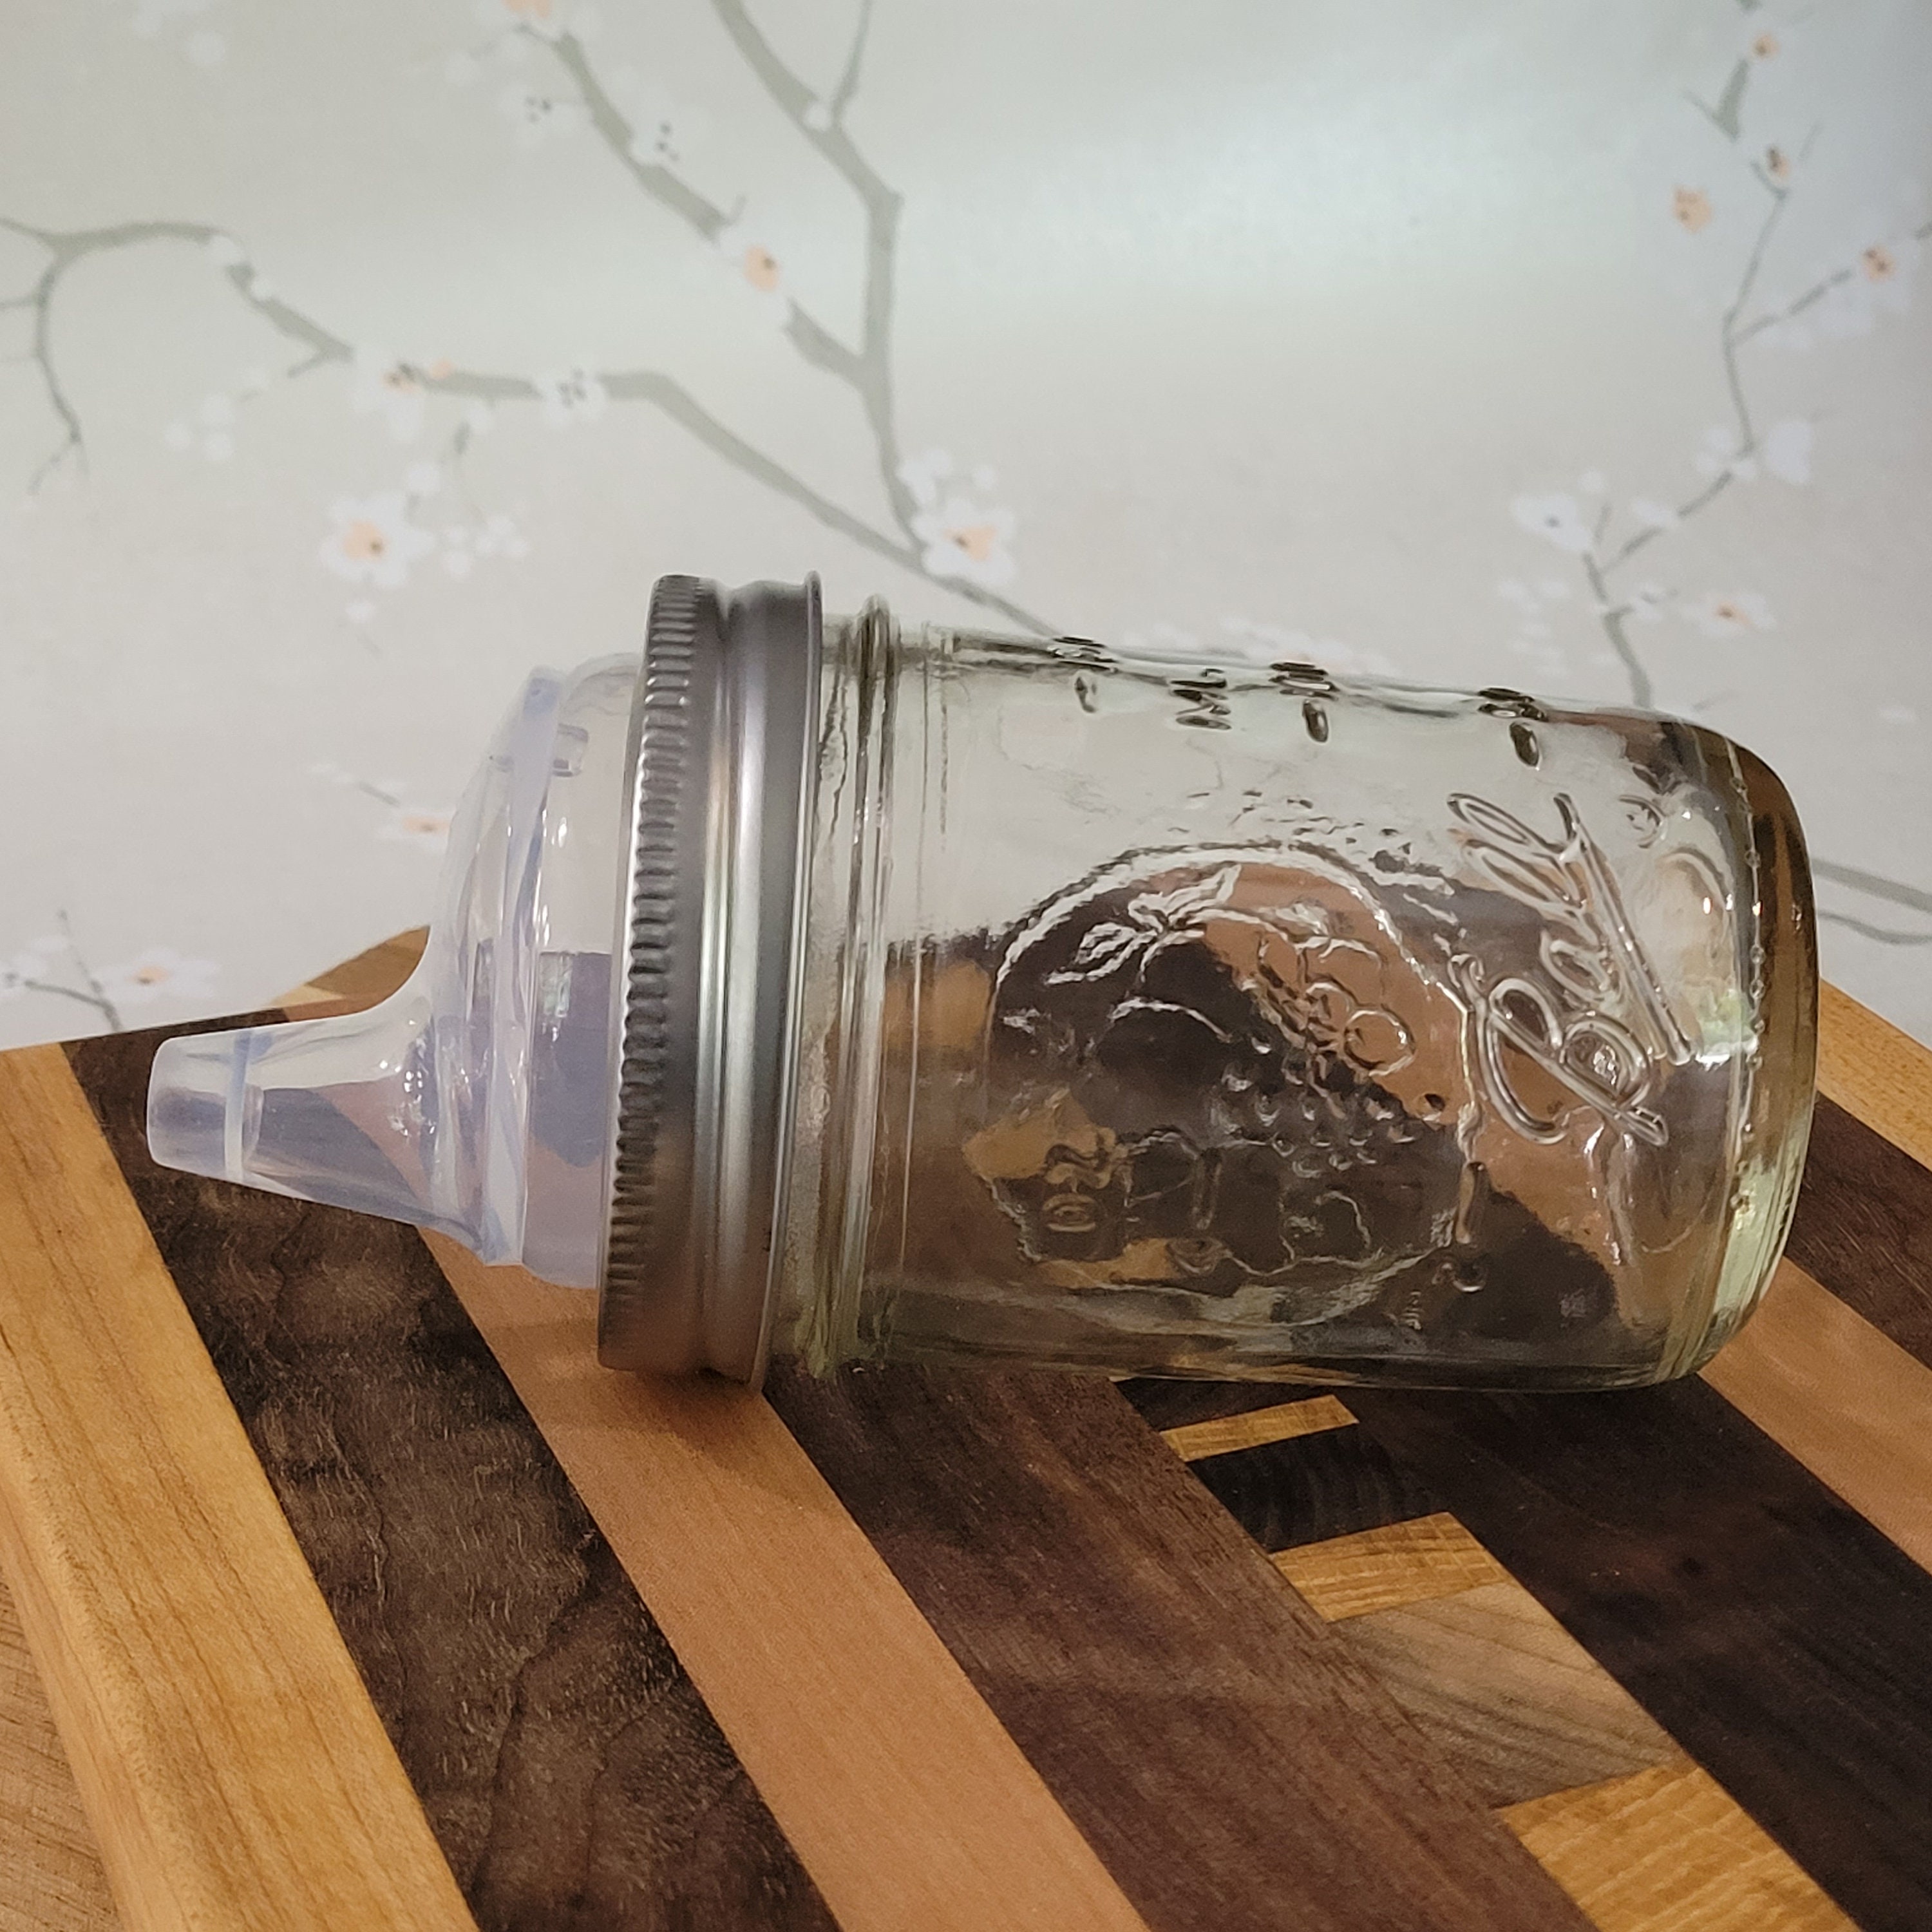 6 Pack 16 Oz. Mason Jar Mugs with Handle, Tin Lid and Plastic Straws - Old  Fashion Drinking Glasses for Party or Daily Use - China Mason Jars with Lids  and Straws